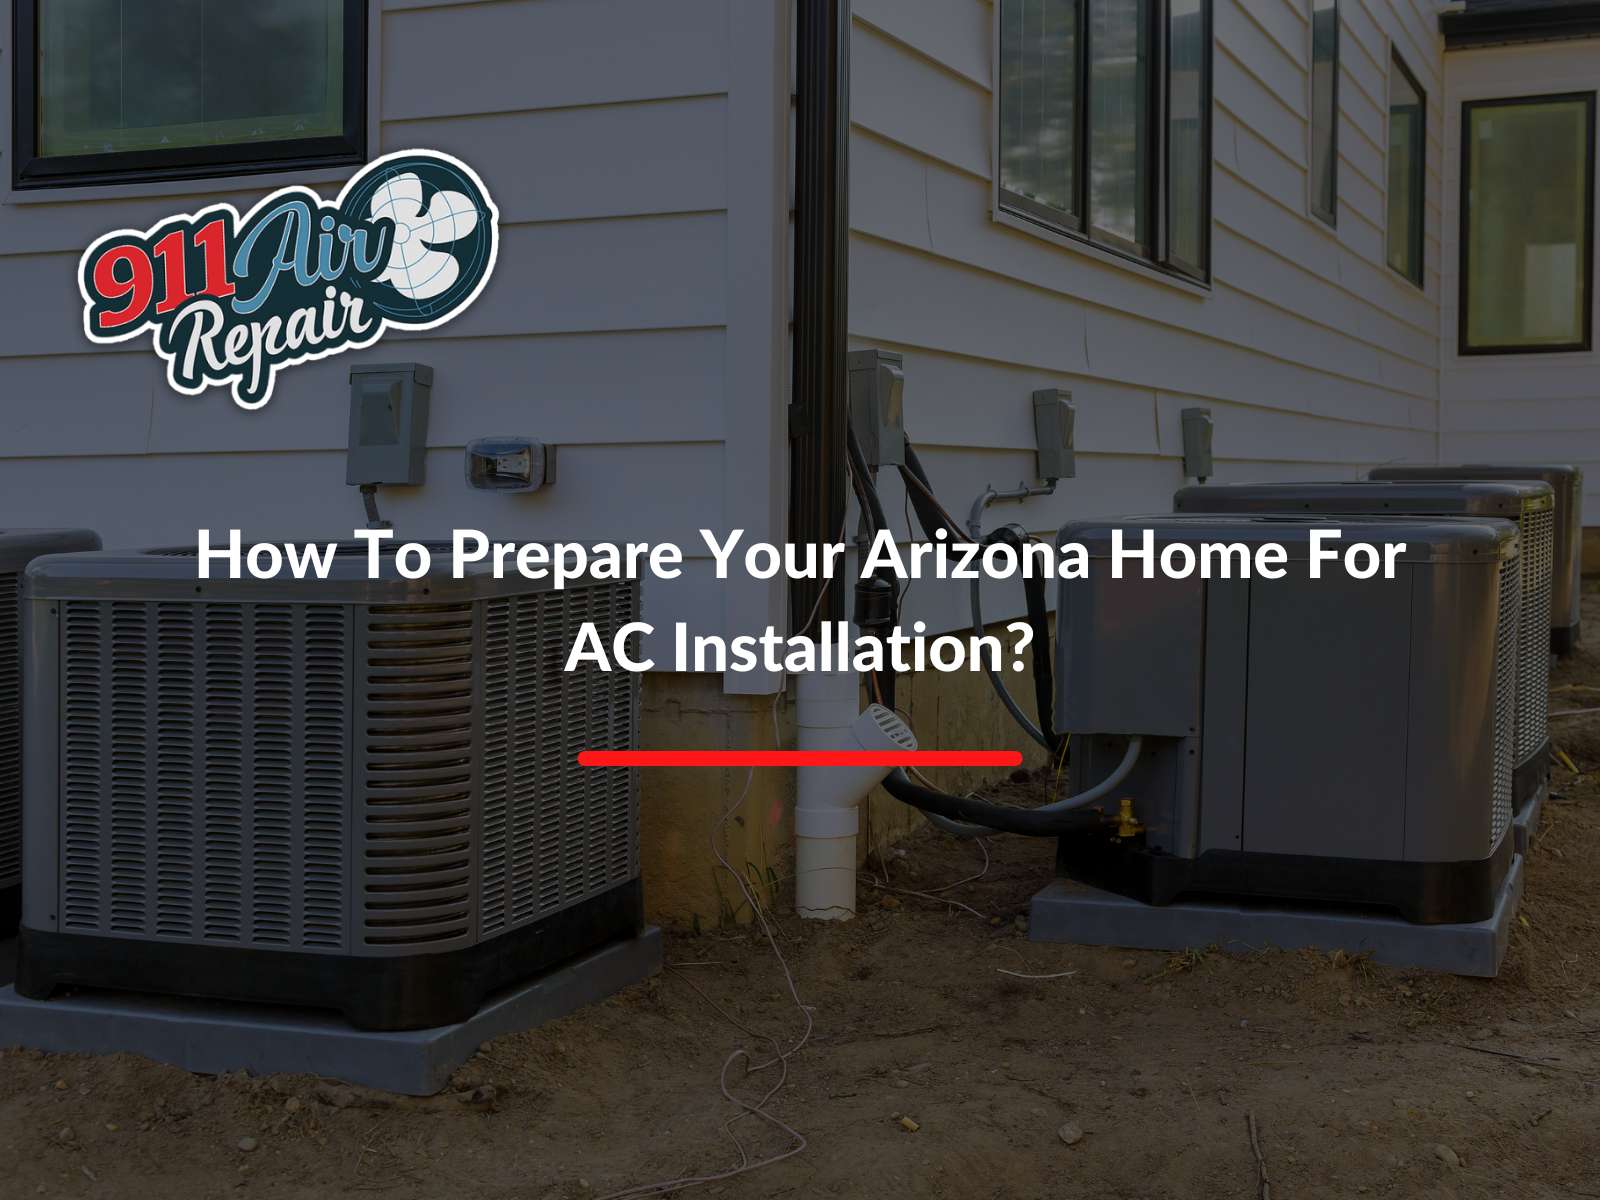 How To Prepare Your Arizona Home For AC Installation